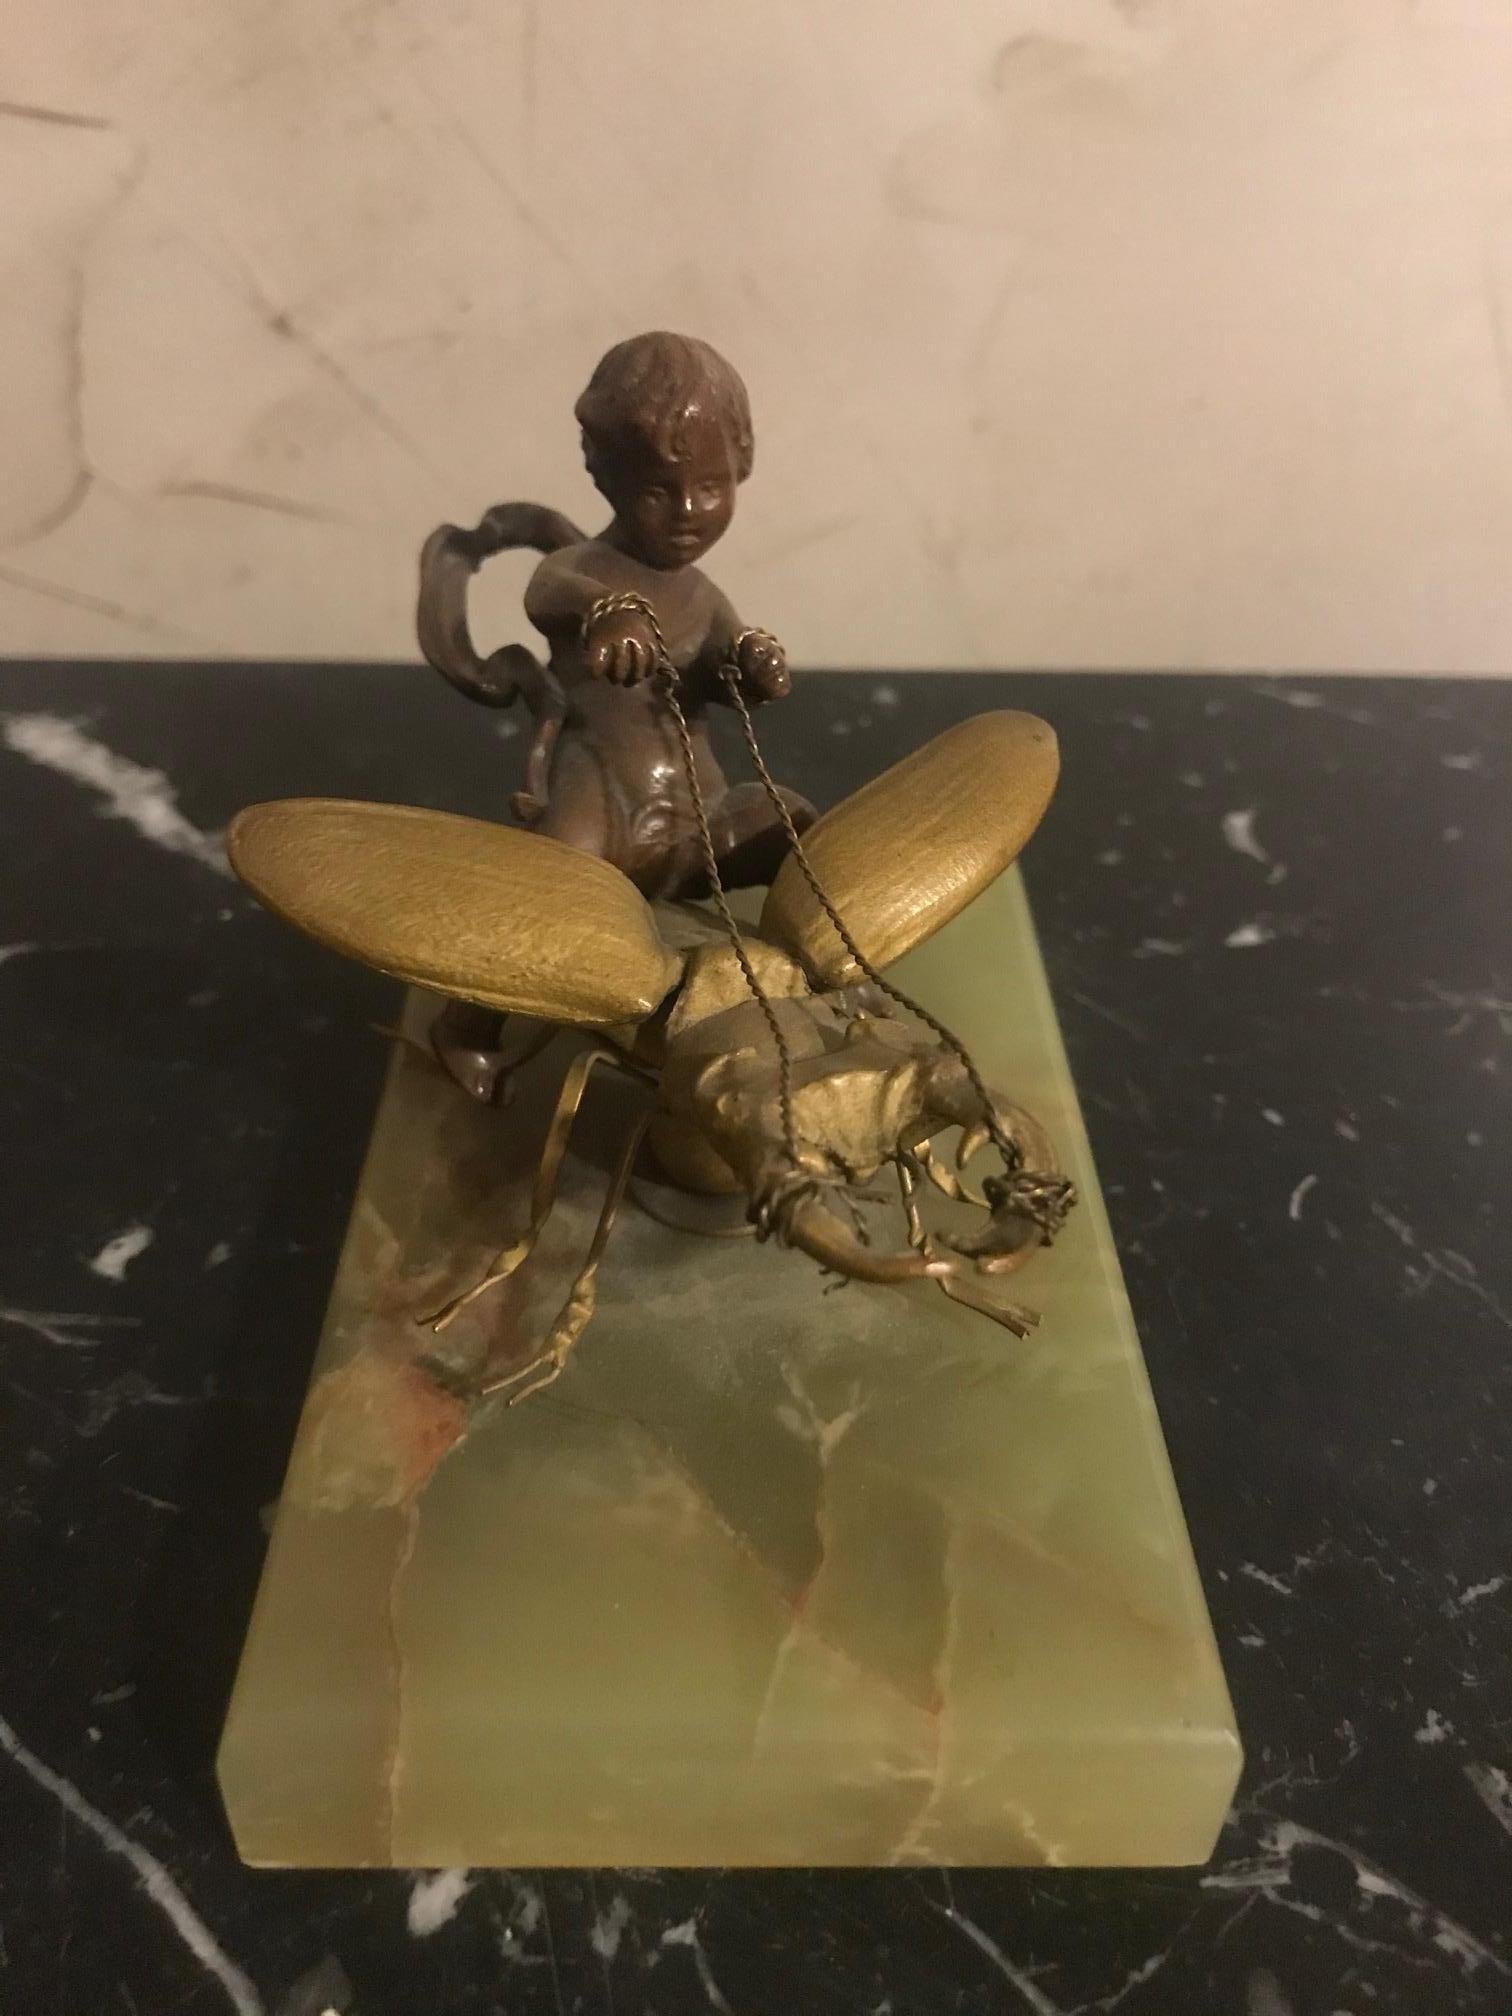 Very nice and rare 19th century bronze statue of a child overlapping a Beetle in the style of Eutrope Bouret (1833-1906) on a green marble base.
Very rare, never seen this bronze topic. Two different bronze patina.
Nice details on the face of the